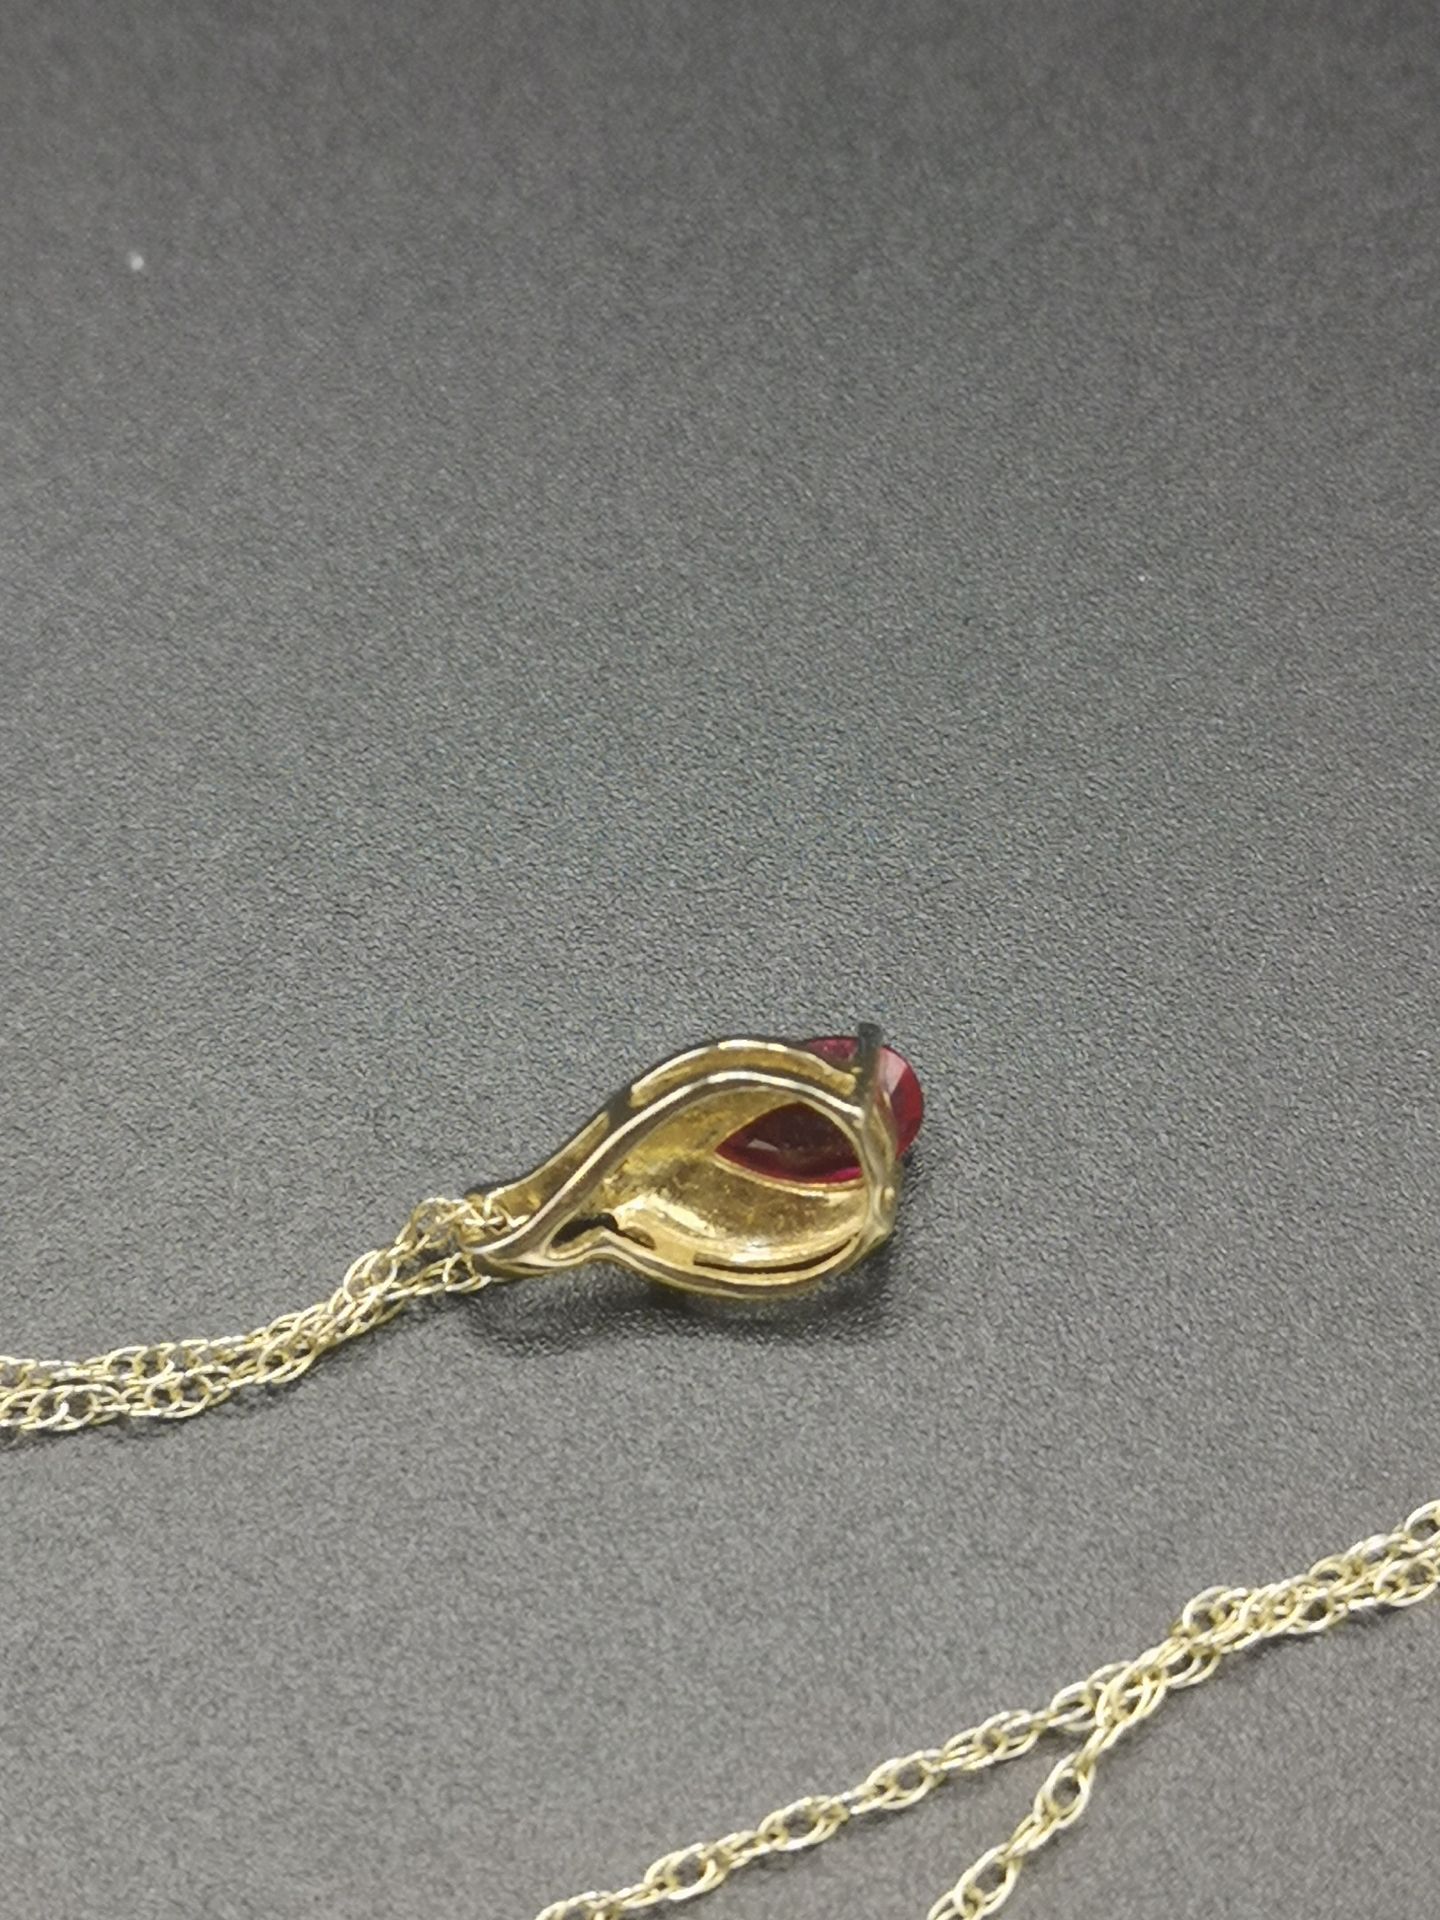 9ct gold necklace with ruby and diamond pendant - Image 3 of 5